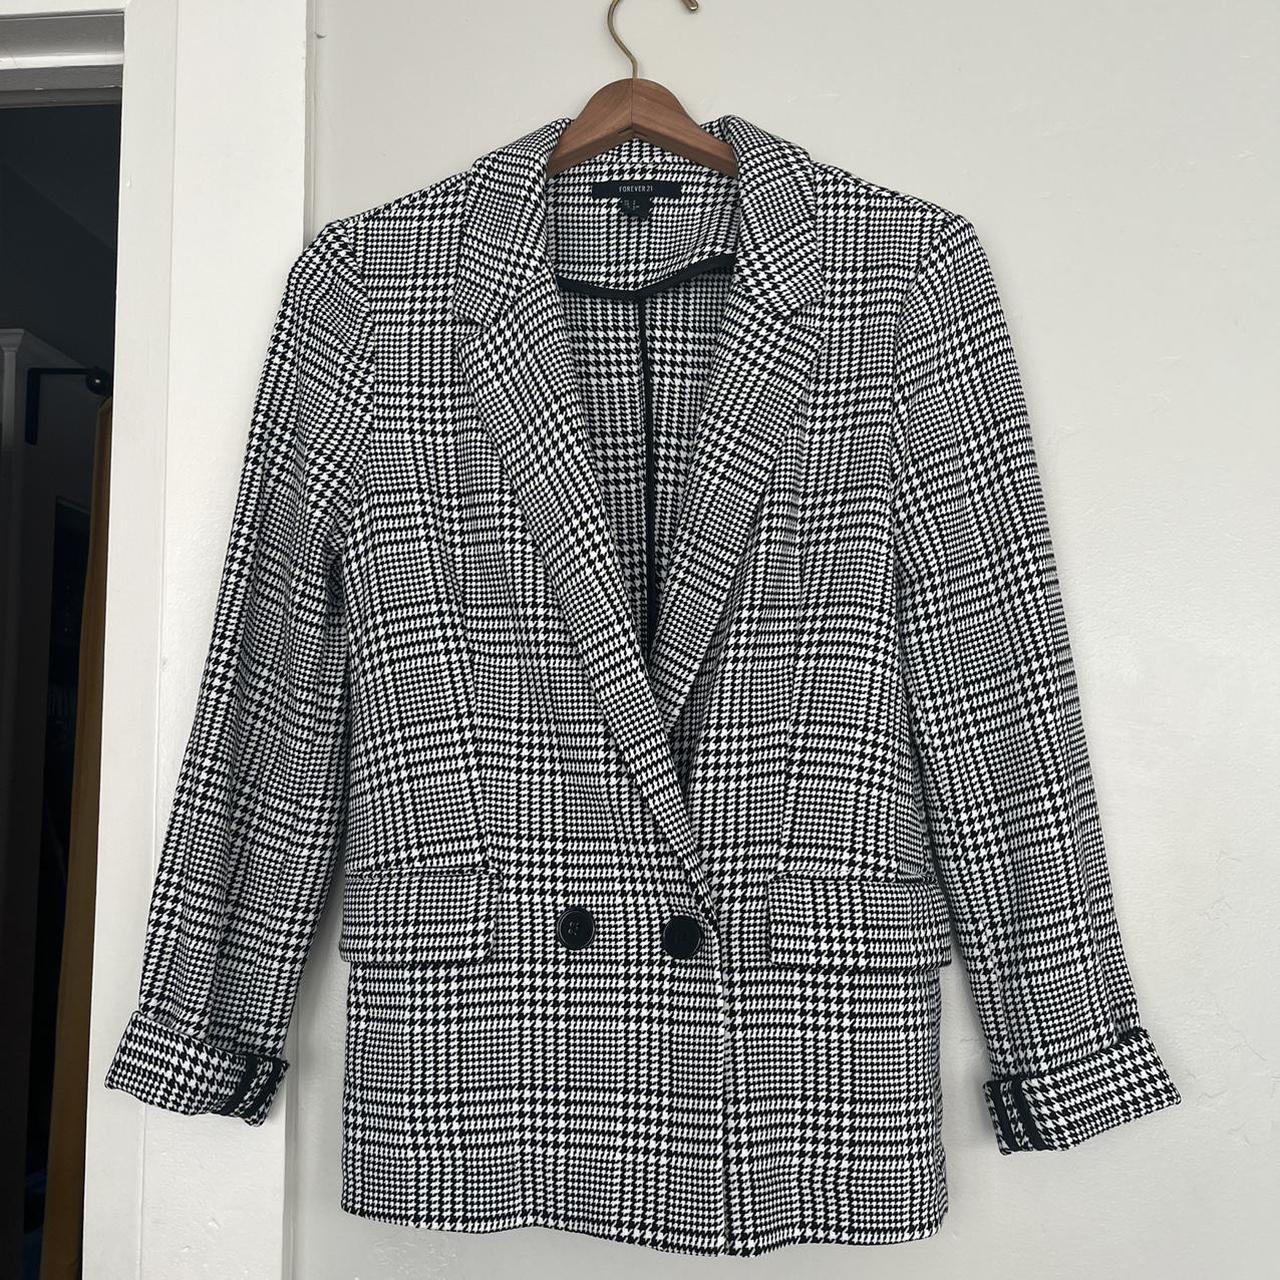 Product Image 1 - Black and white houndstooth blazer,